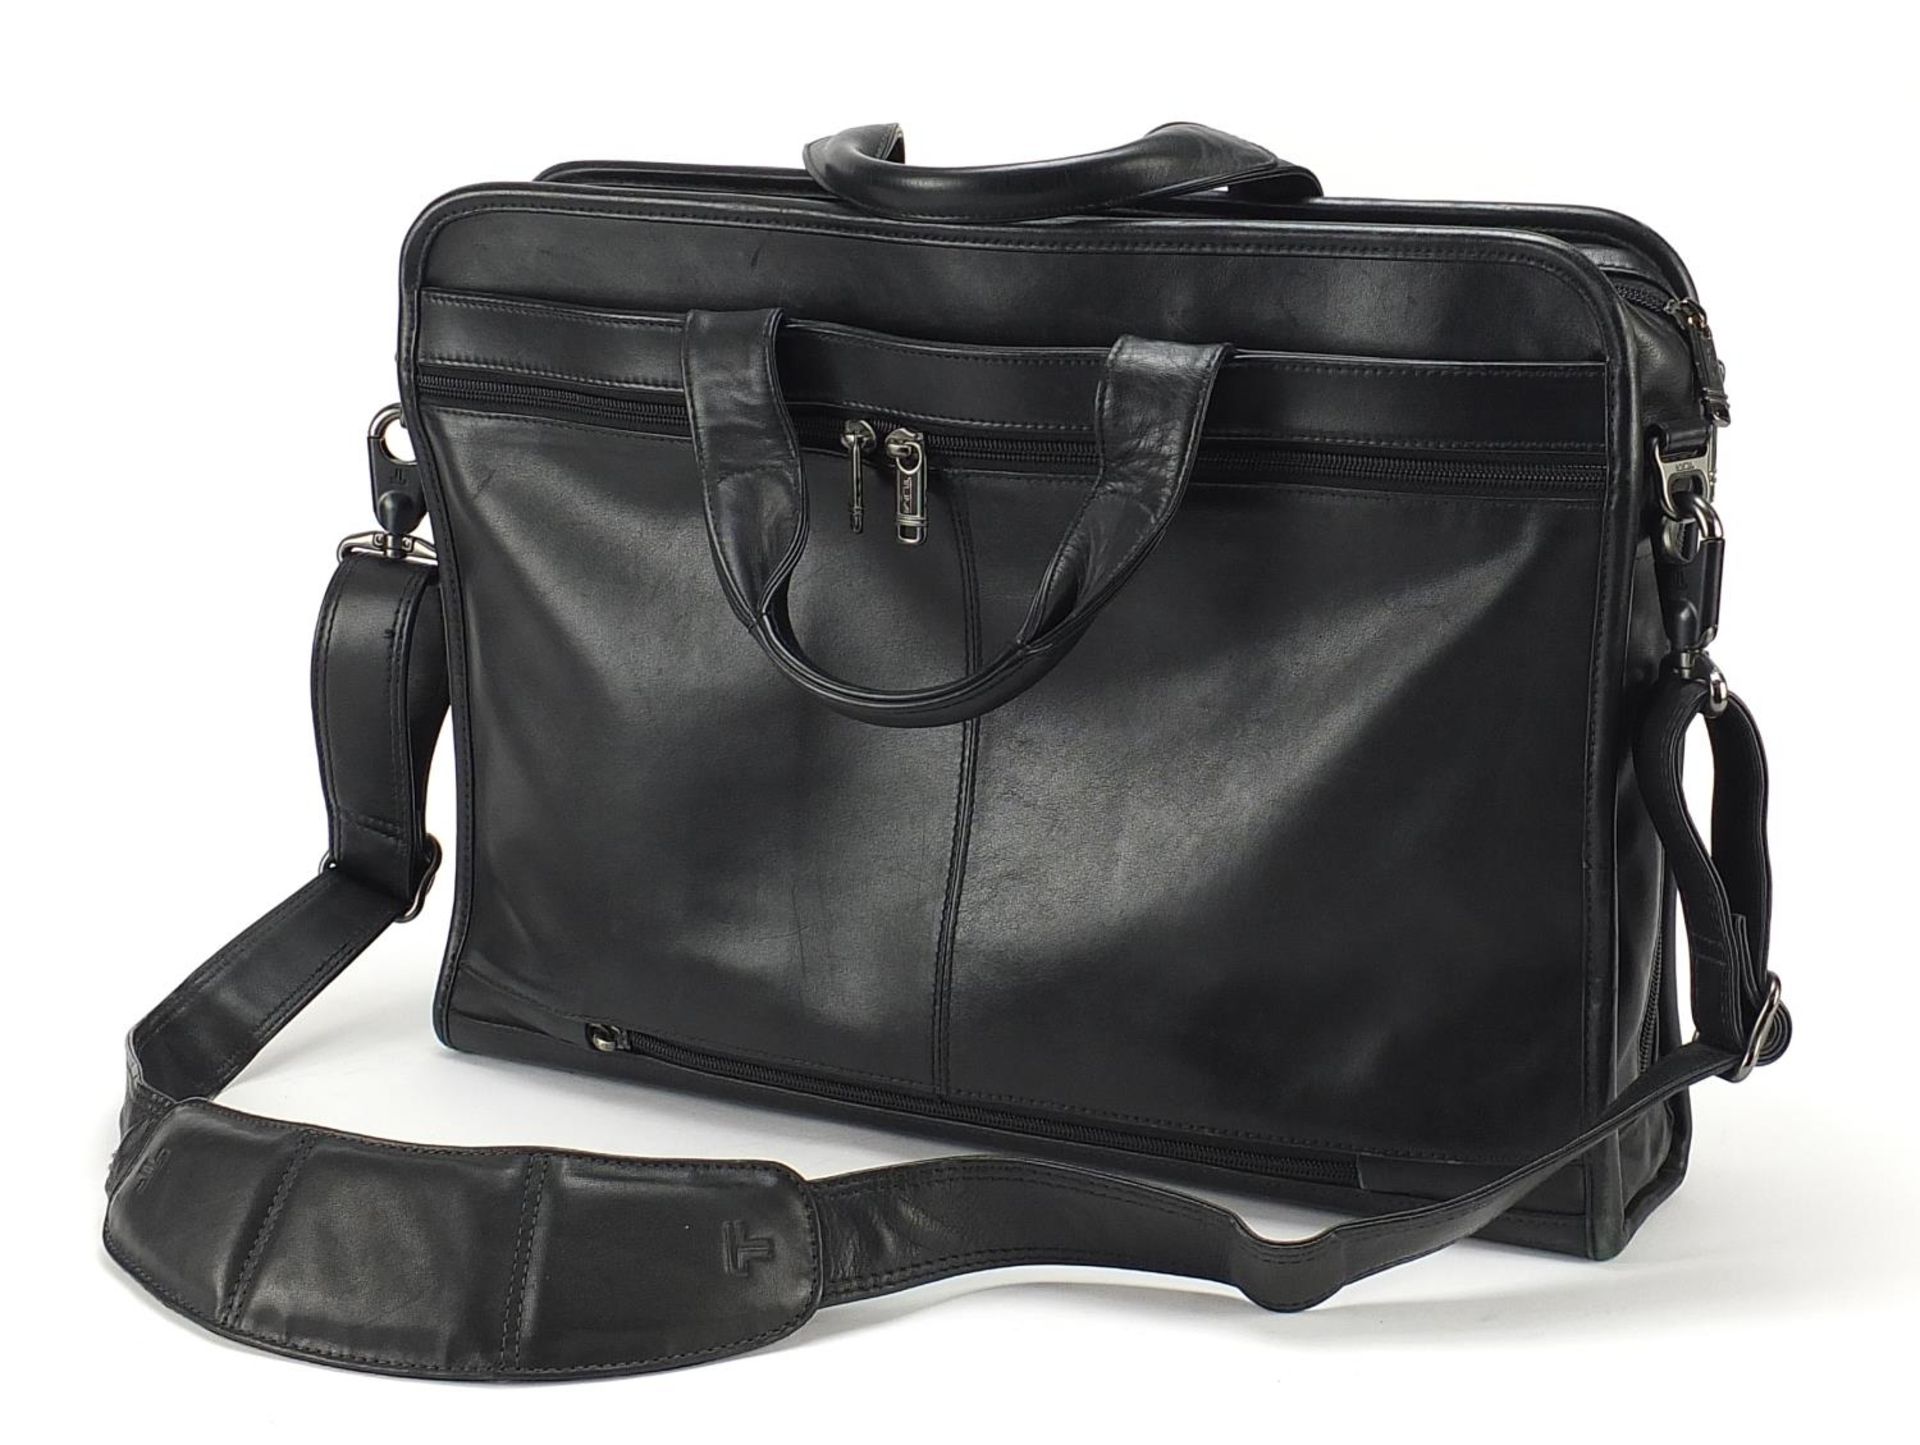 Tumi leather laptop briefcase, 47cm wide - Image 4 of 5